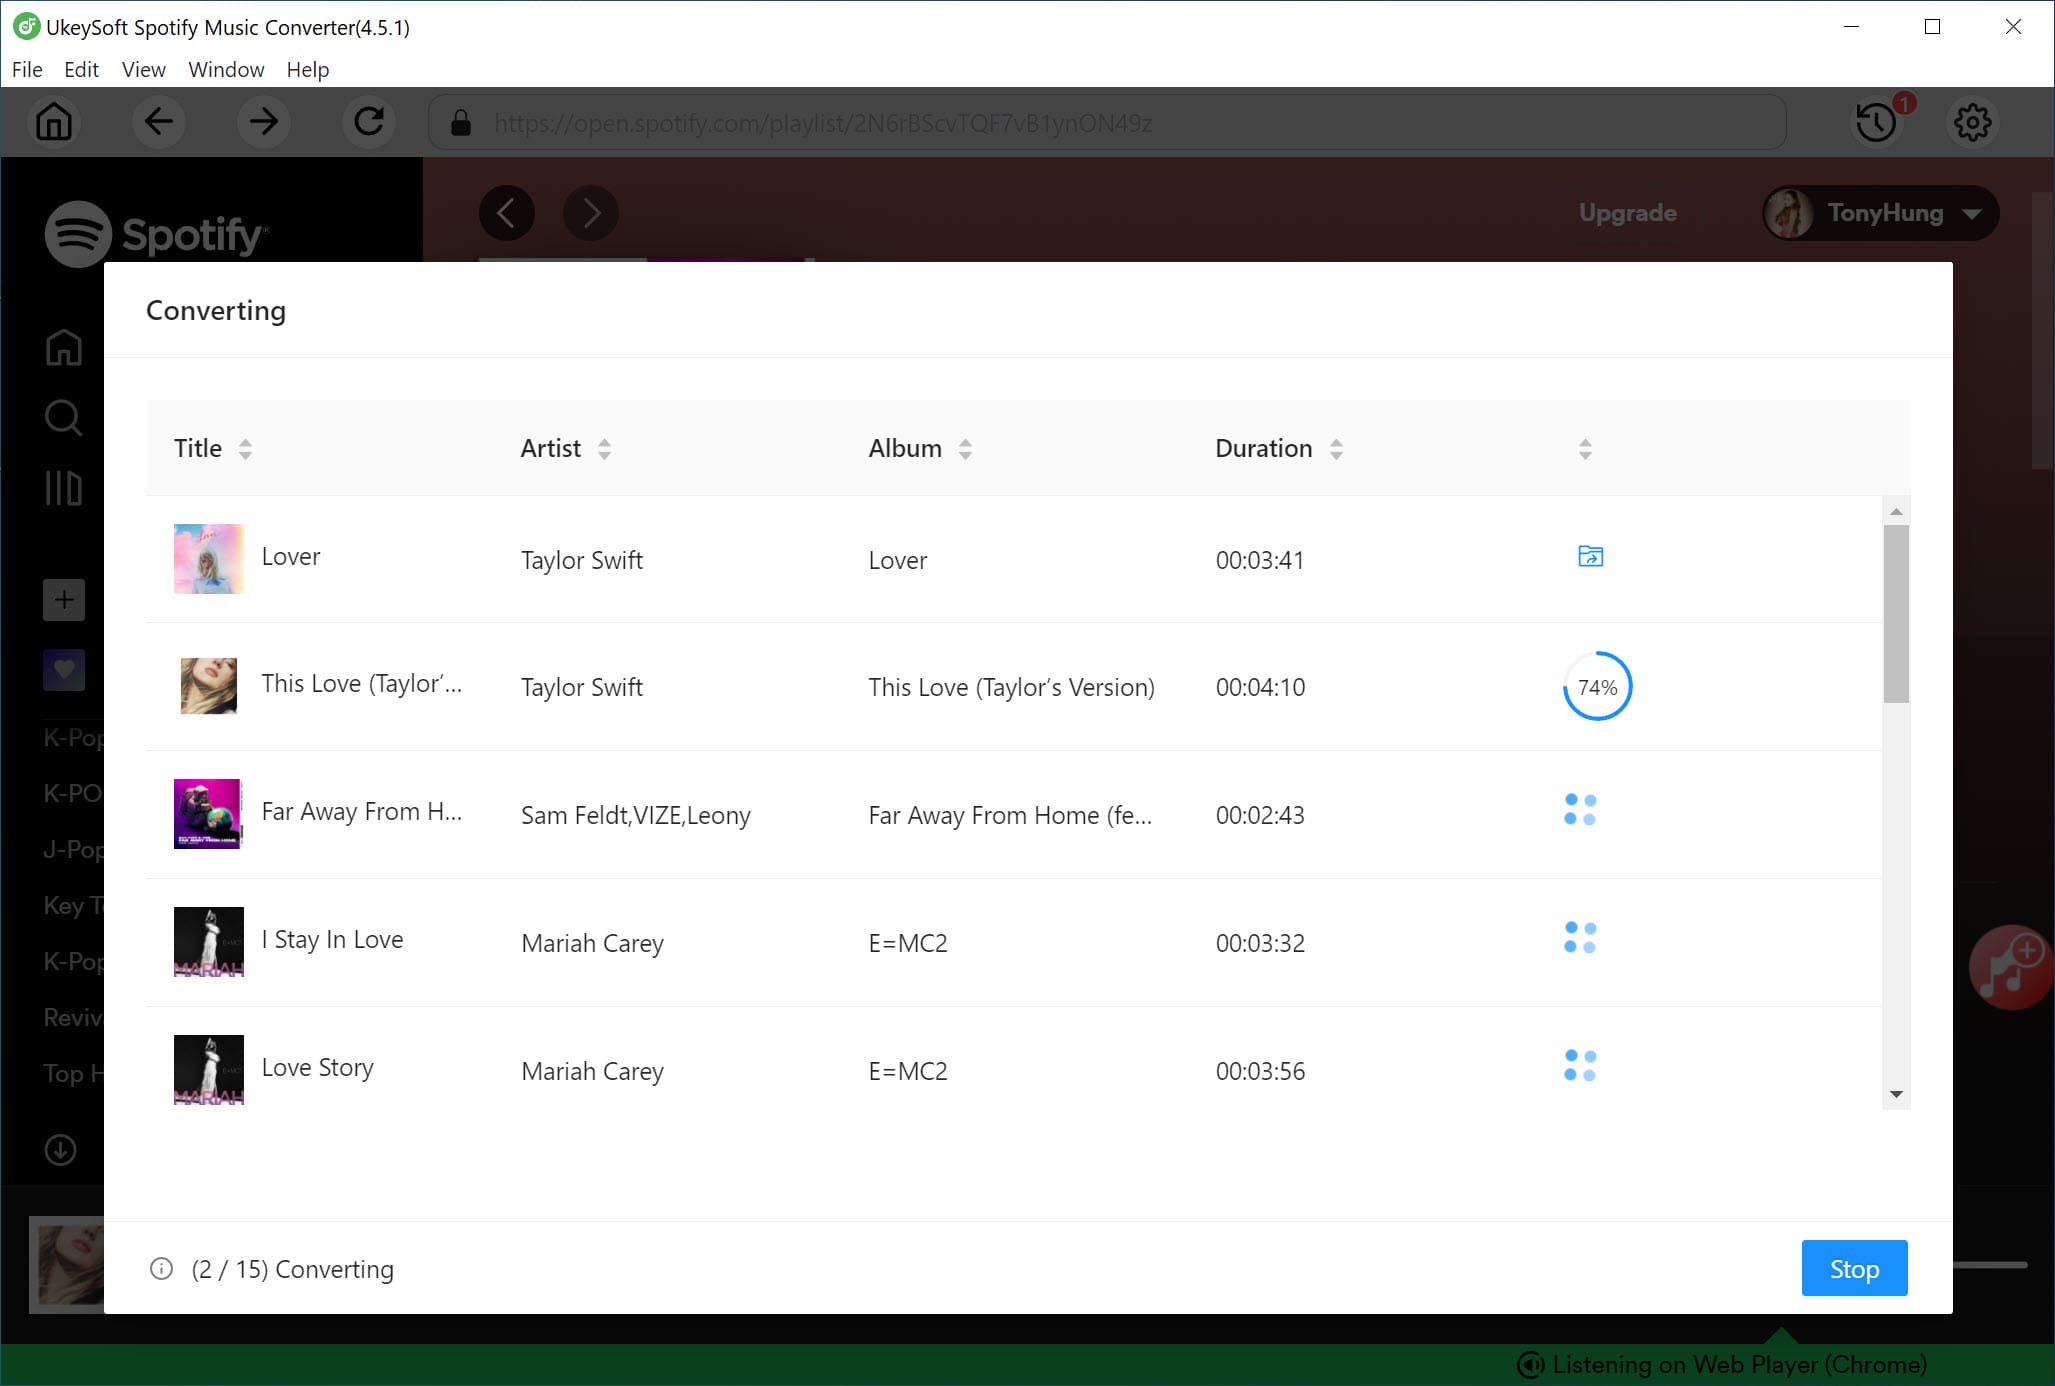 download mp3 songs from Spotify